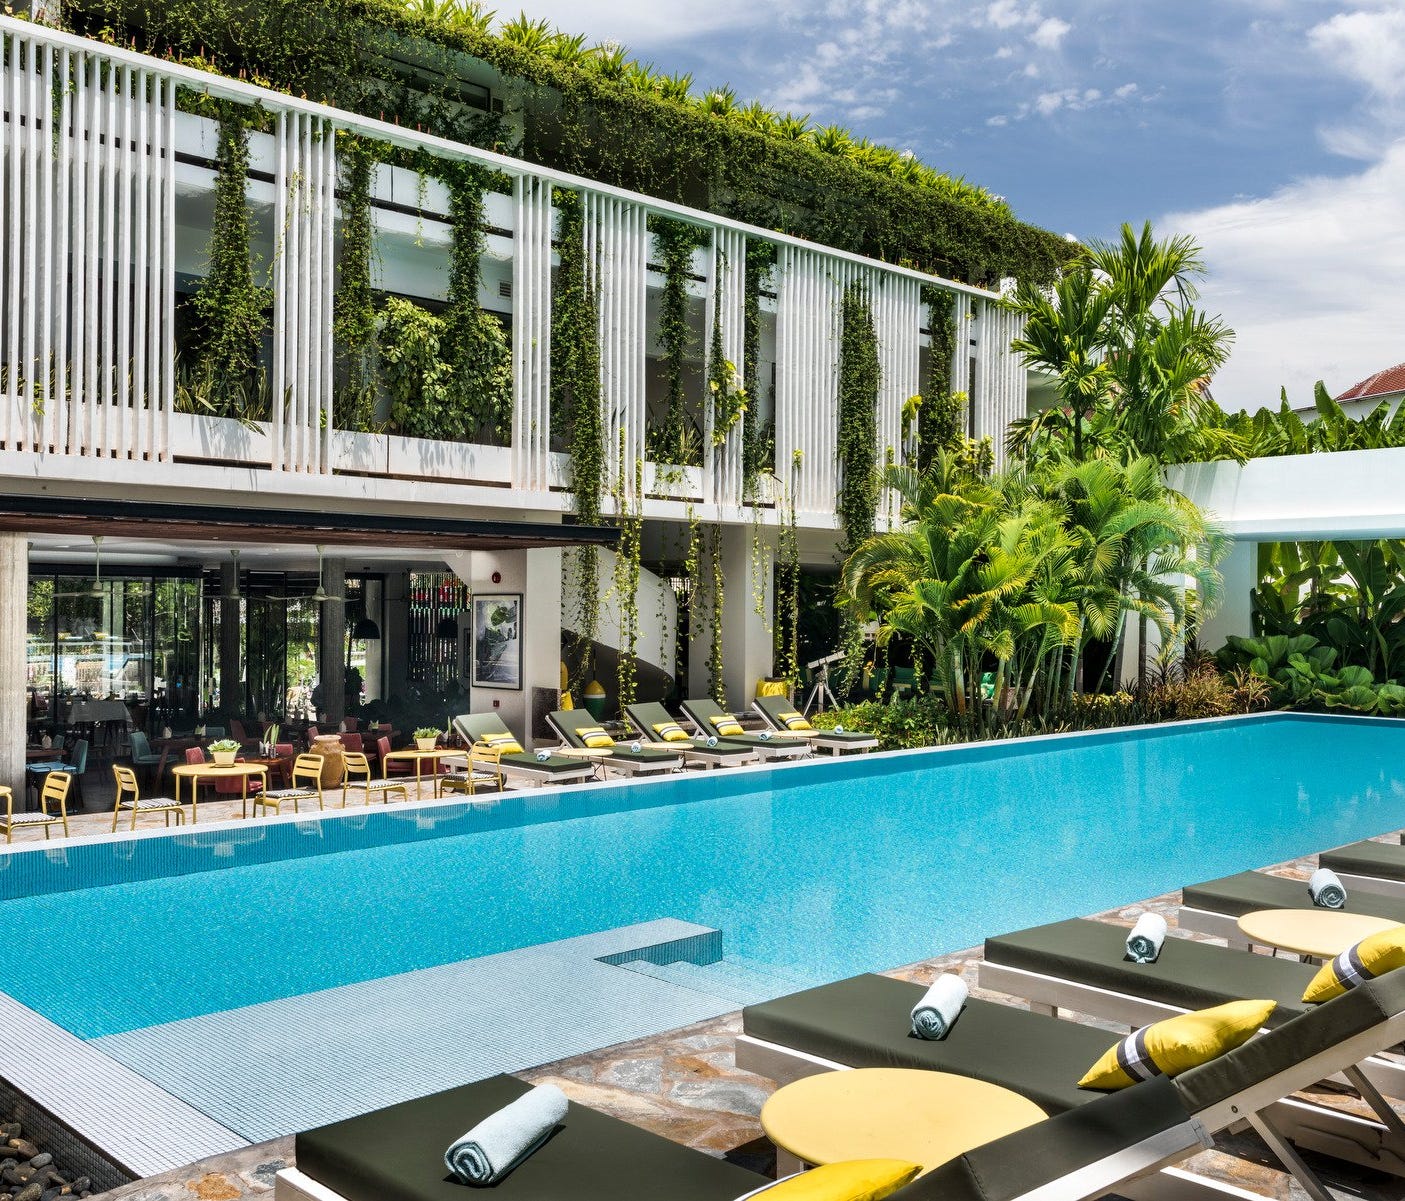 Viroth's Hotel in Siem Reap, Cambodia, is the No. 1 hotel in the world, according to TripAdvisor's 2018 Travelers' Choice Awards.